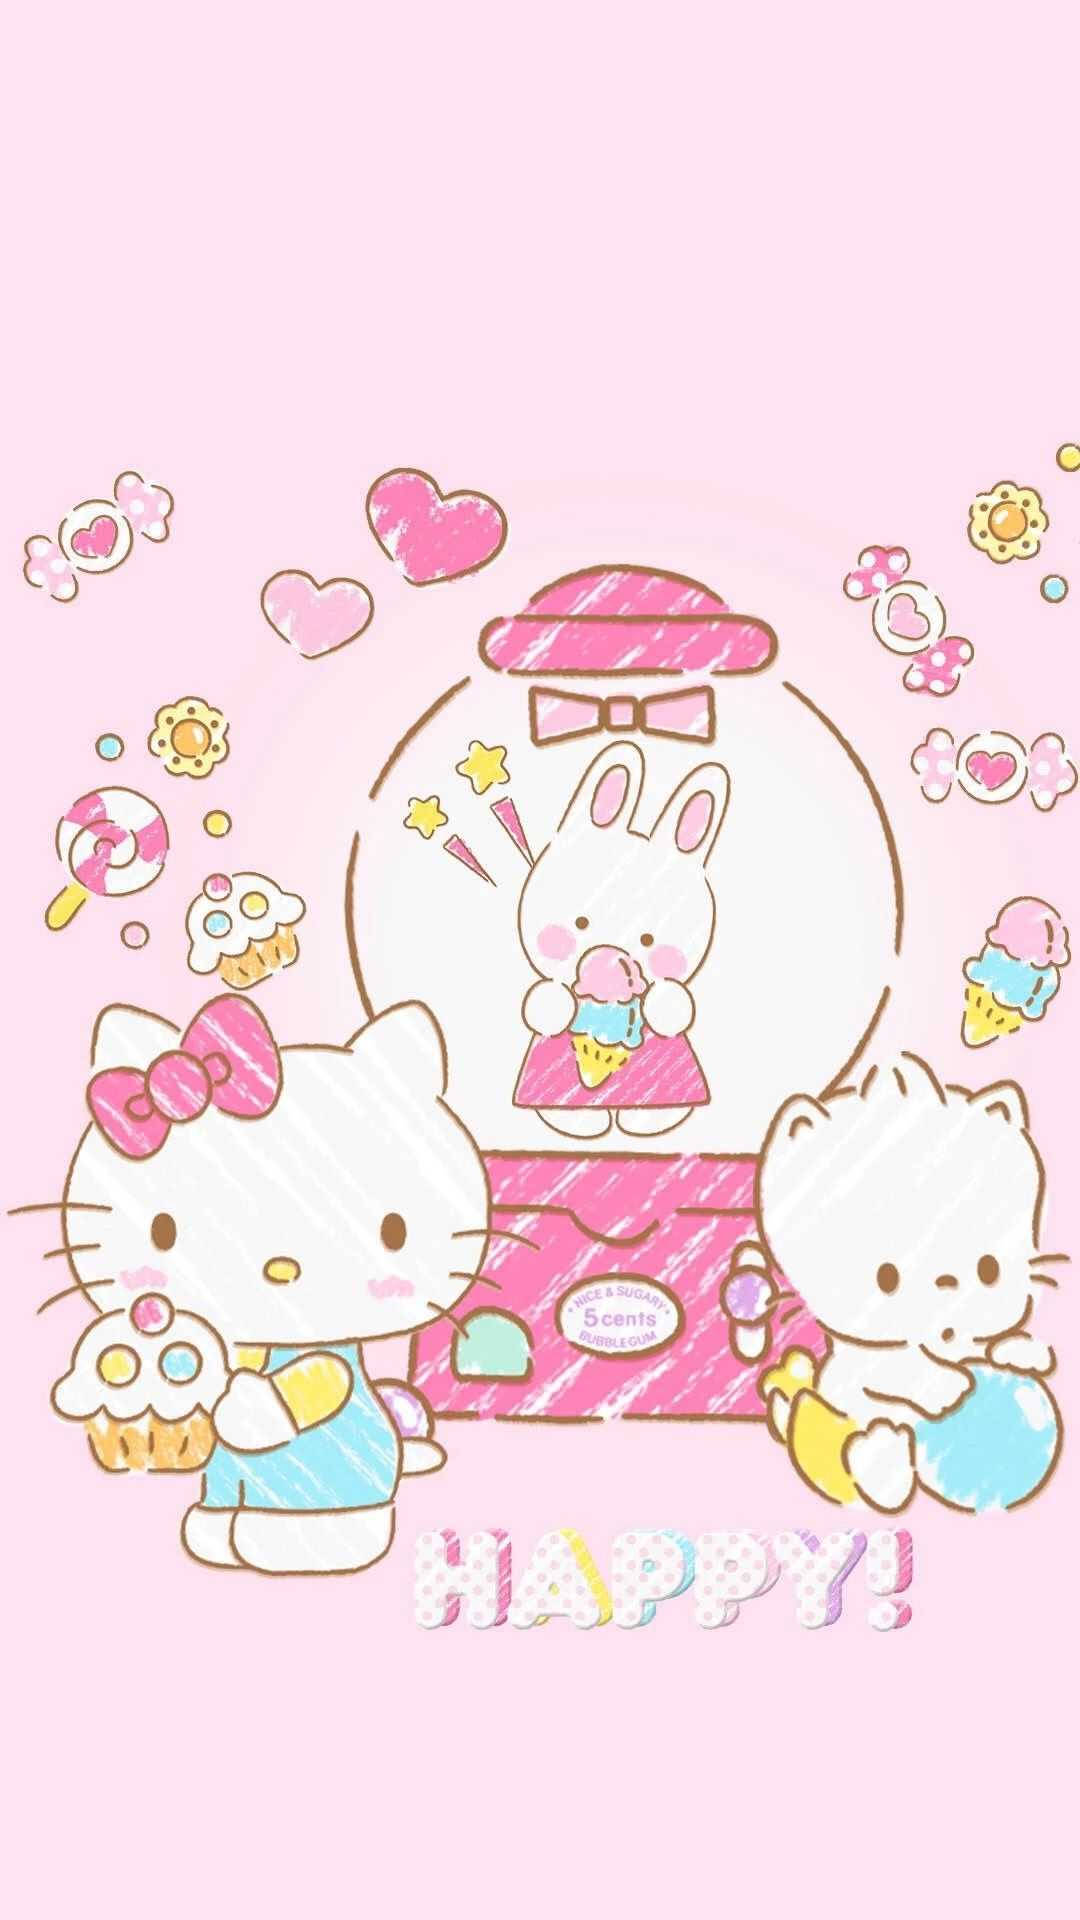 "Show your unconditional love with Cute Sanrio!" Wallpaper